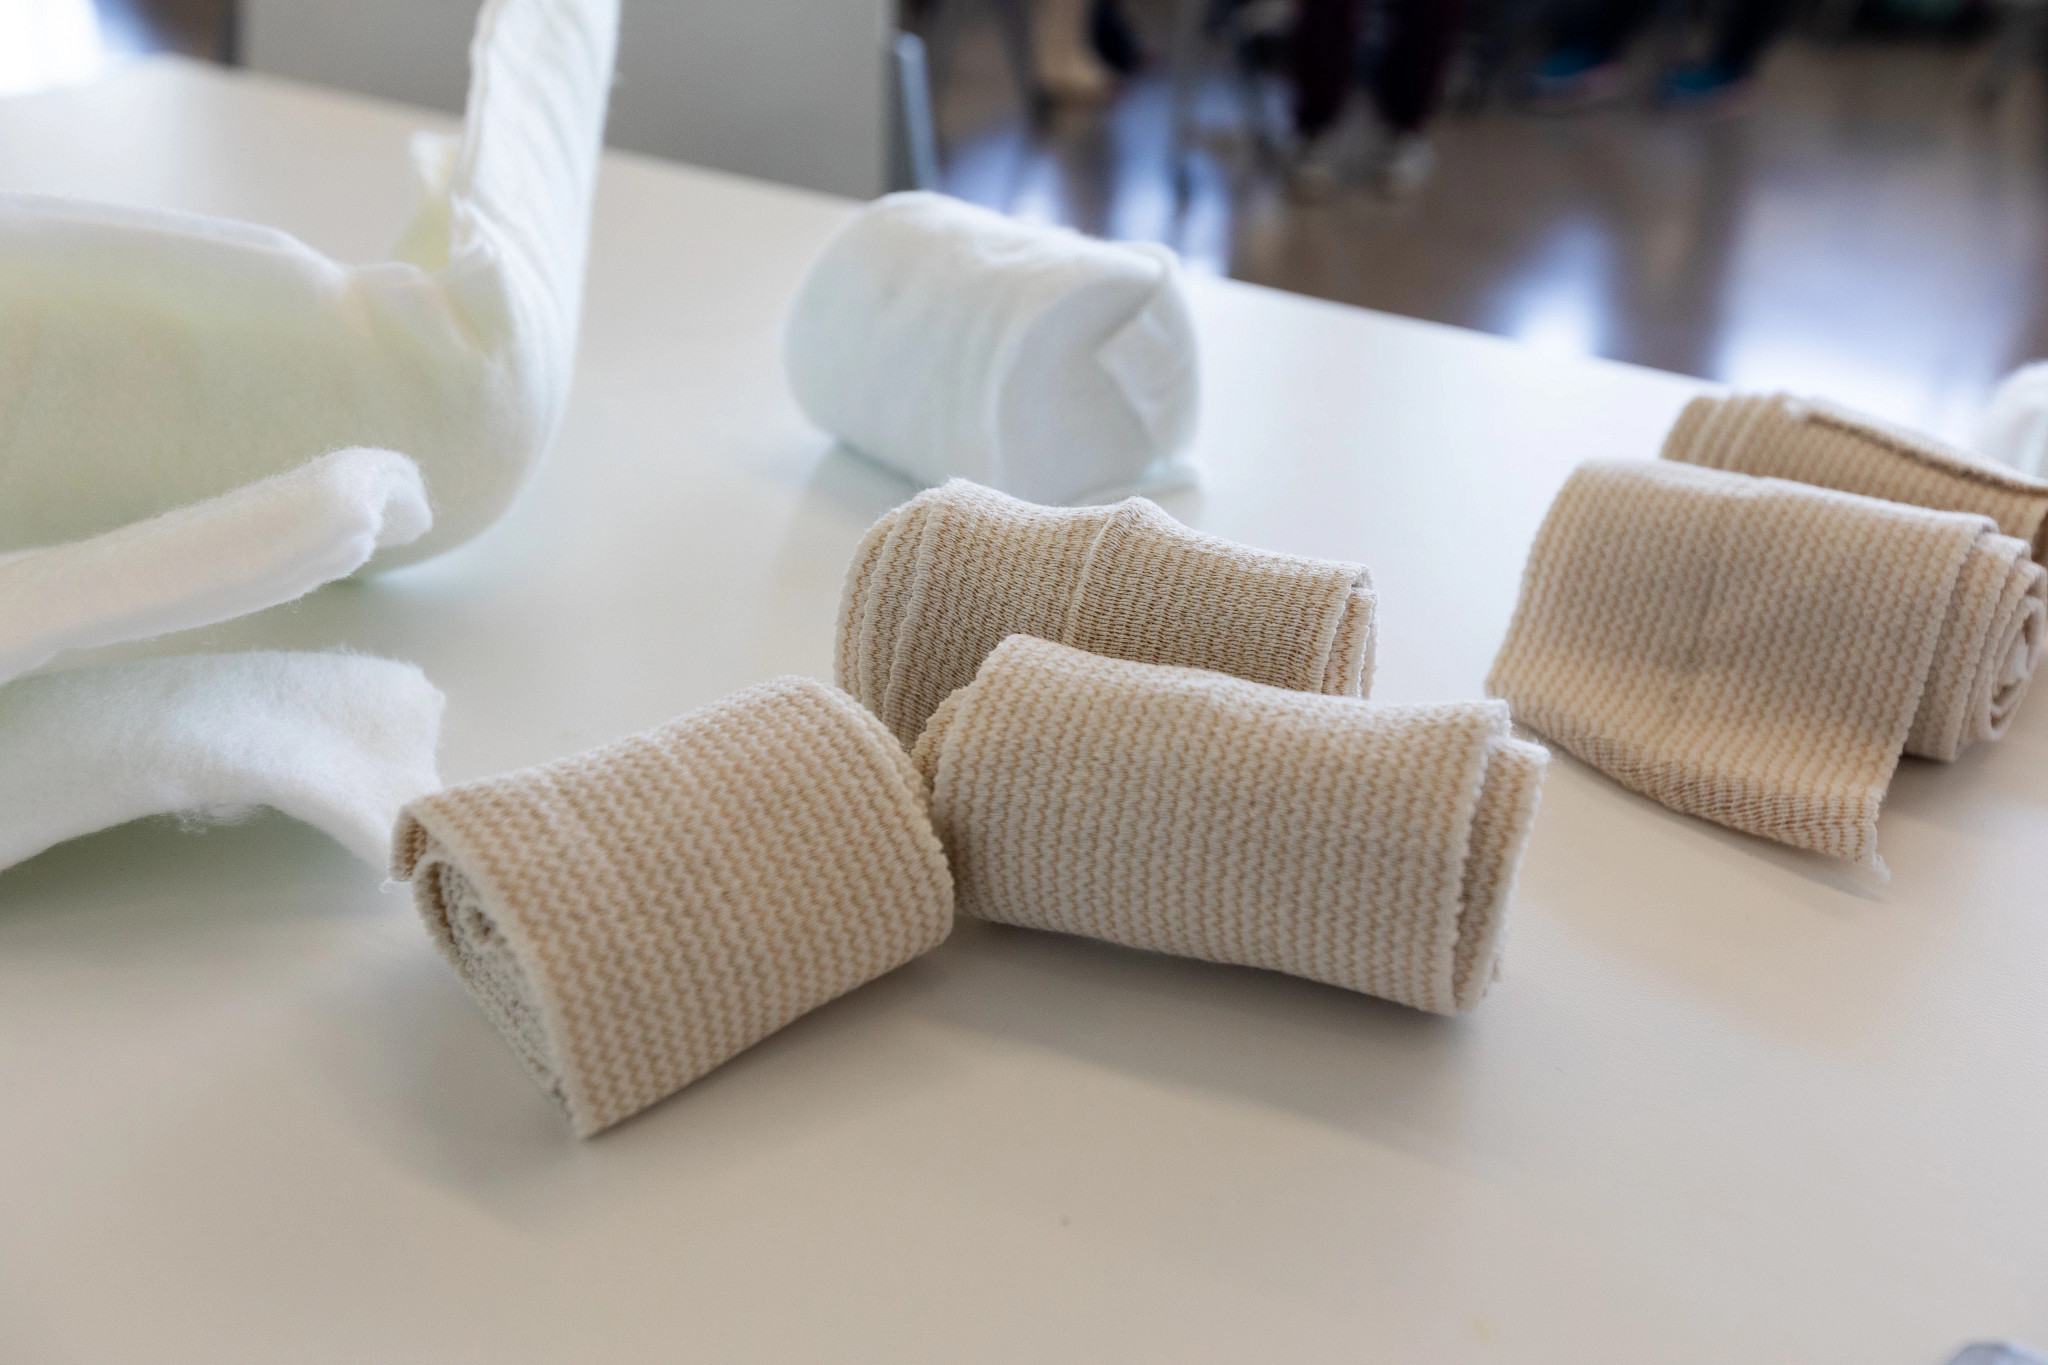 Rolls of bandages and gauze sitting on a table.